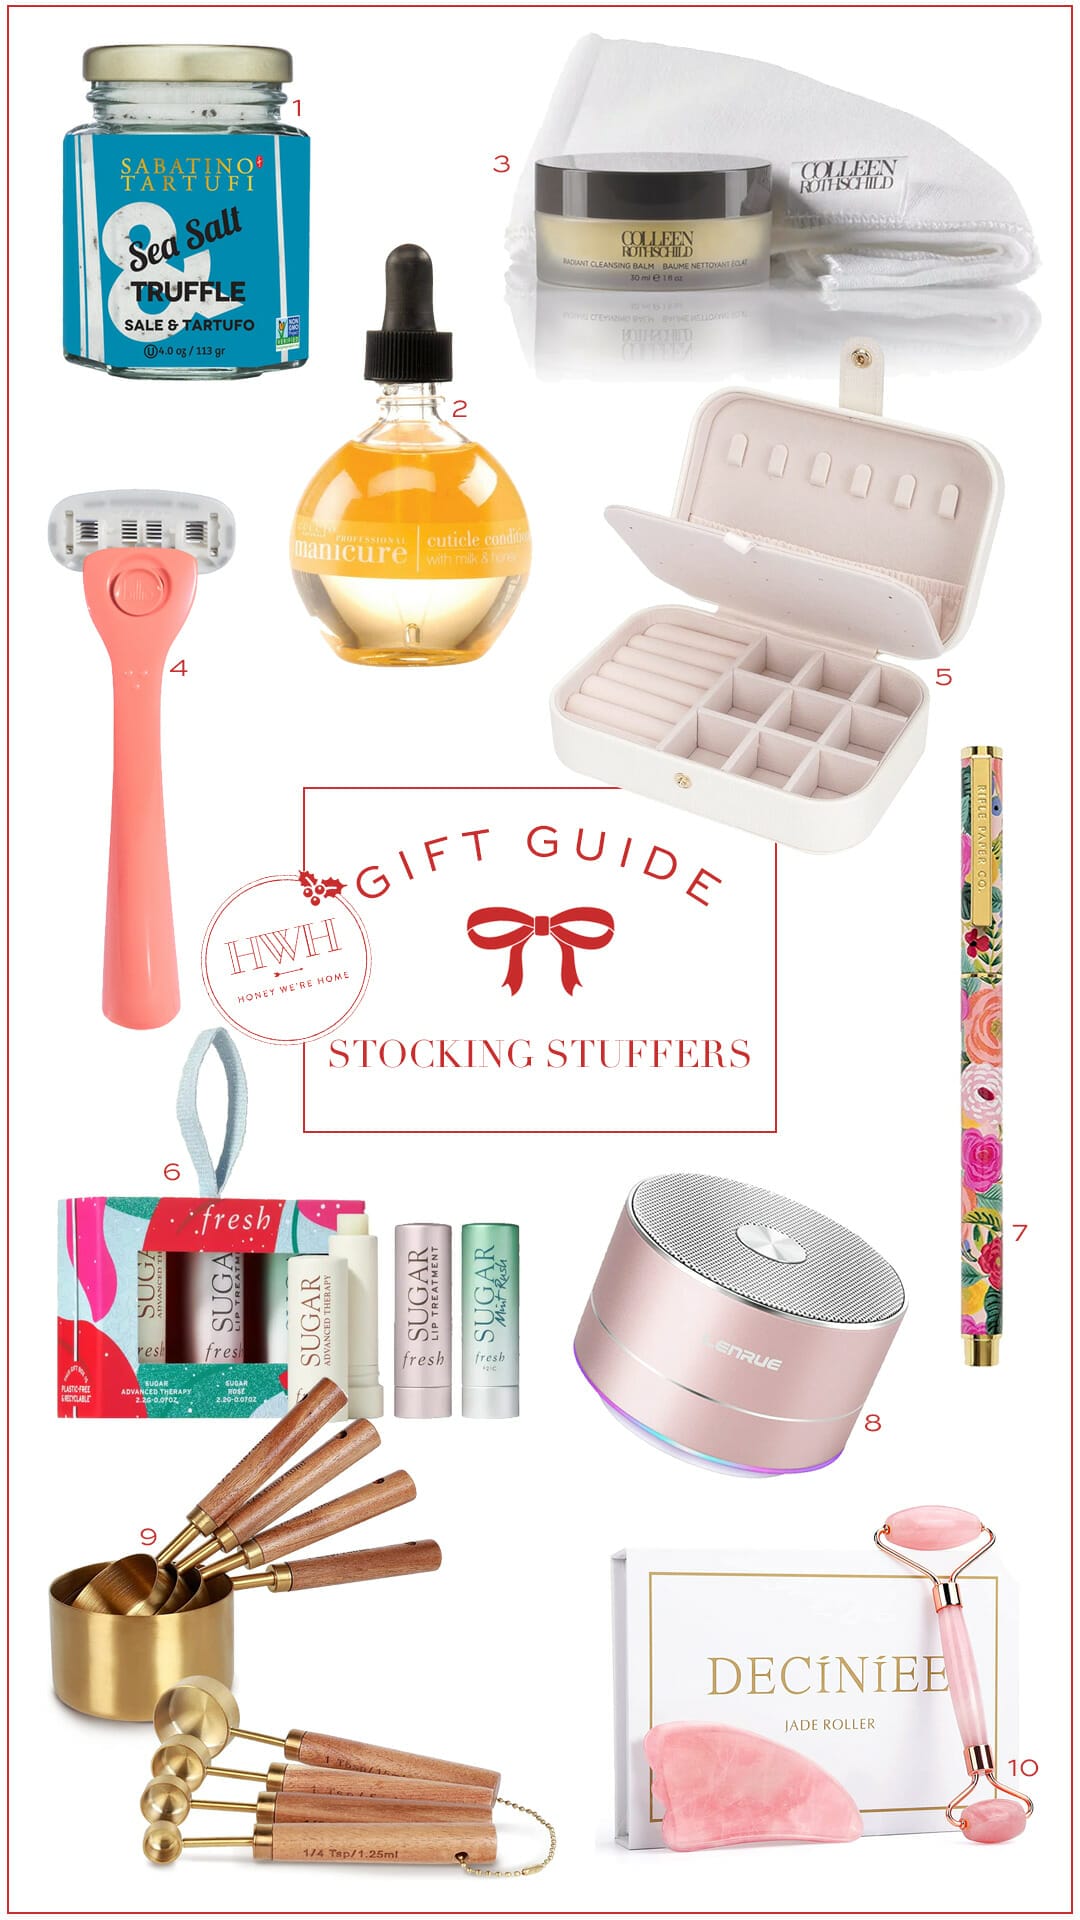 Under $25 Gifts for Her - By Lauren M